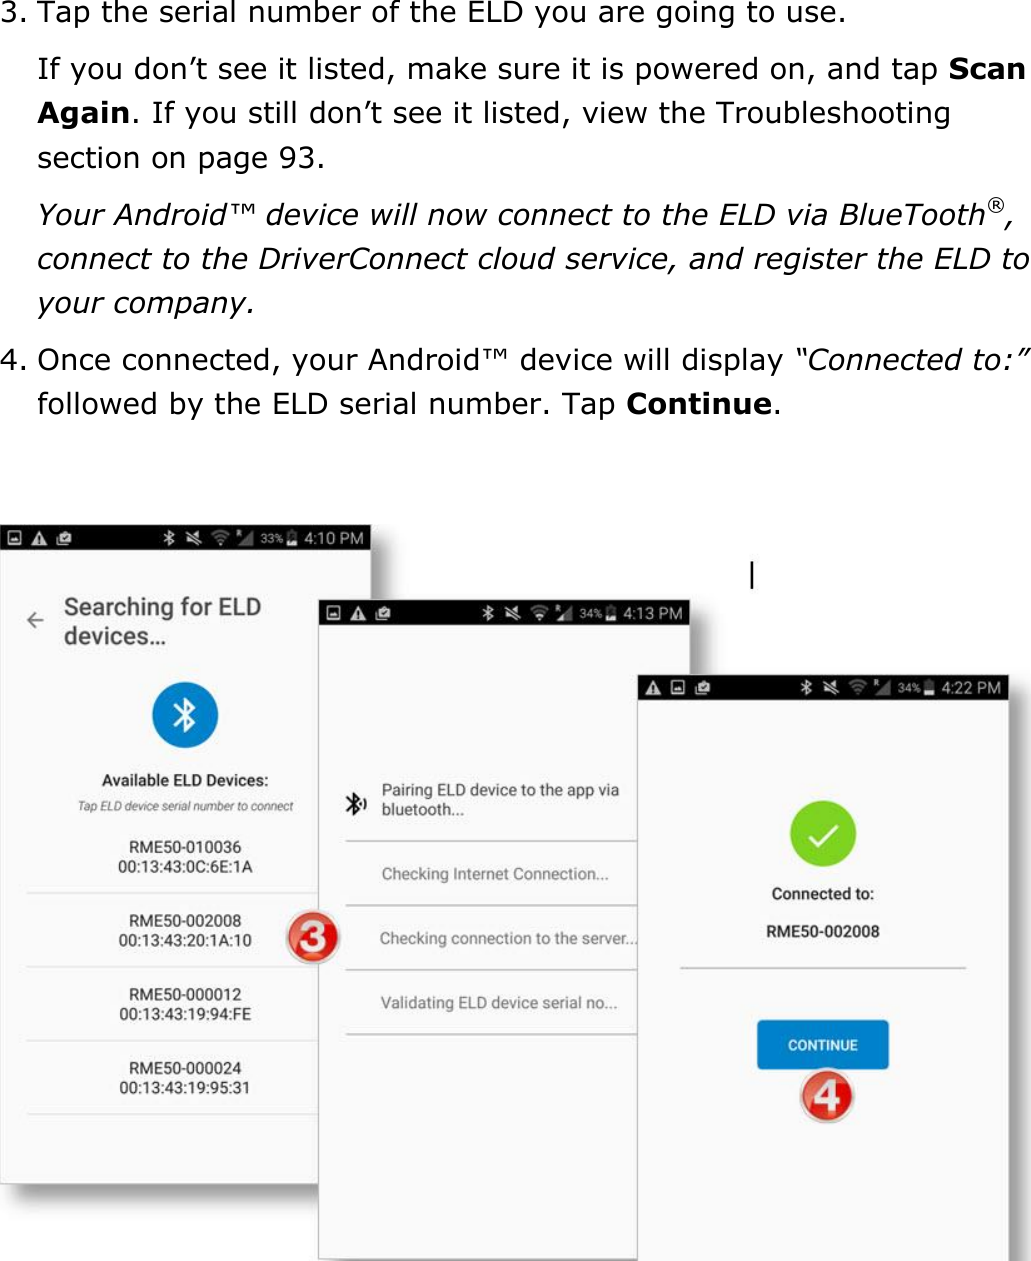 Set My Duty Status DriverConnect User Guide  13 © 2017, Rand McNally, Inc. 3. Tap the serial number of the ELD you are going to use. If you don’t see it listed, make sure it is powered on, and tap Scan Again. If you still don’t see it listed, view the Troubleshooting section on page 93. Your Android™ device will now connect to the ELD via BlueTooth®, connect to the DriverConnect cloud service, and register the ELD to your company. 4. Once connected, your Android™ device will display “Connected to:” followed by the ELD serial number. Tap Continue.     